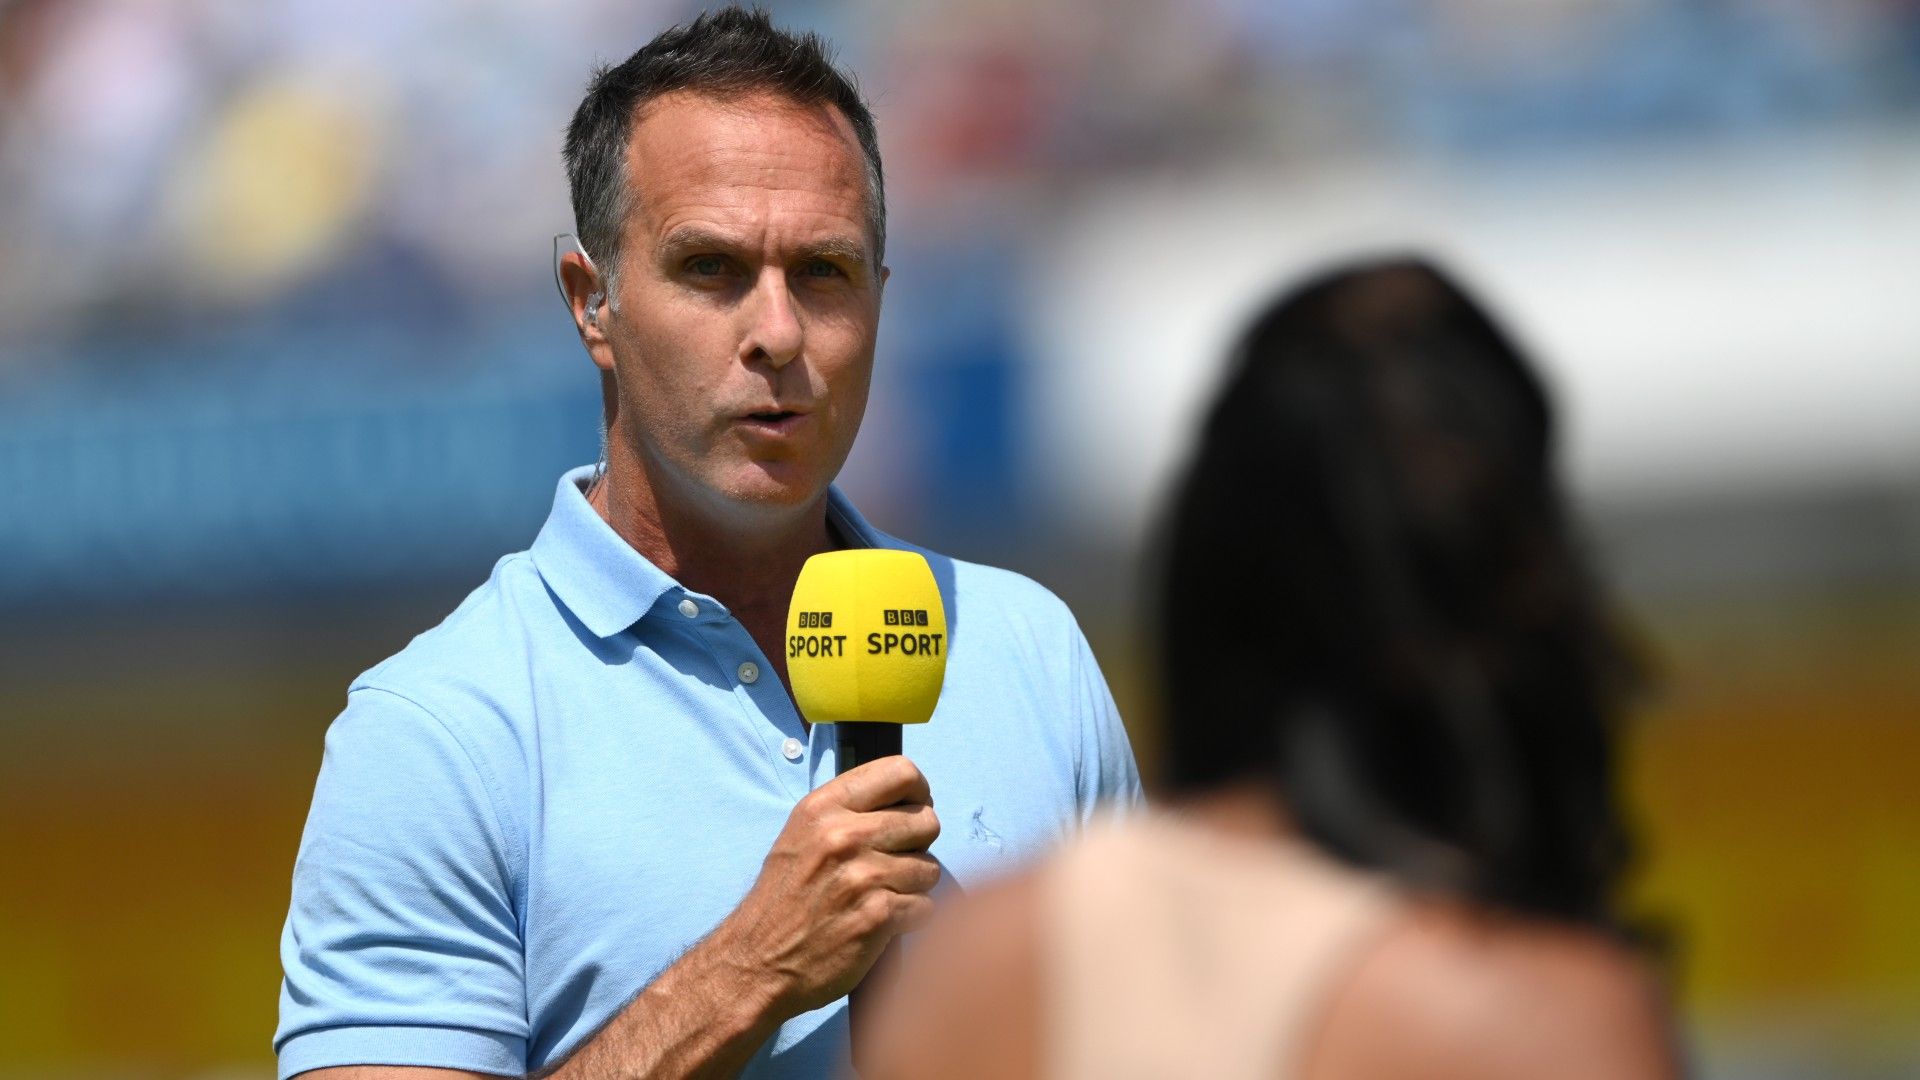 Former England cricket captain Michael Vaughan apologises for offensive tweets and Azeem Rafiq's pain